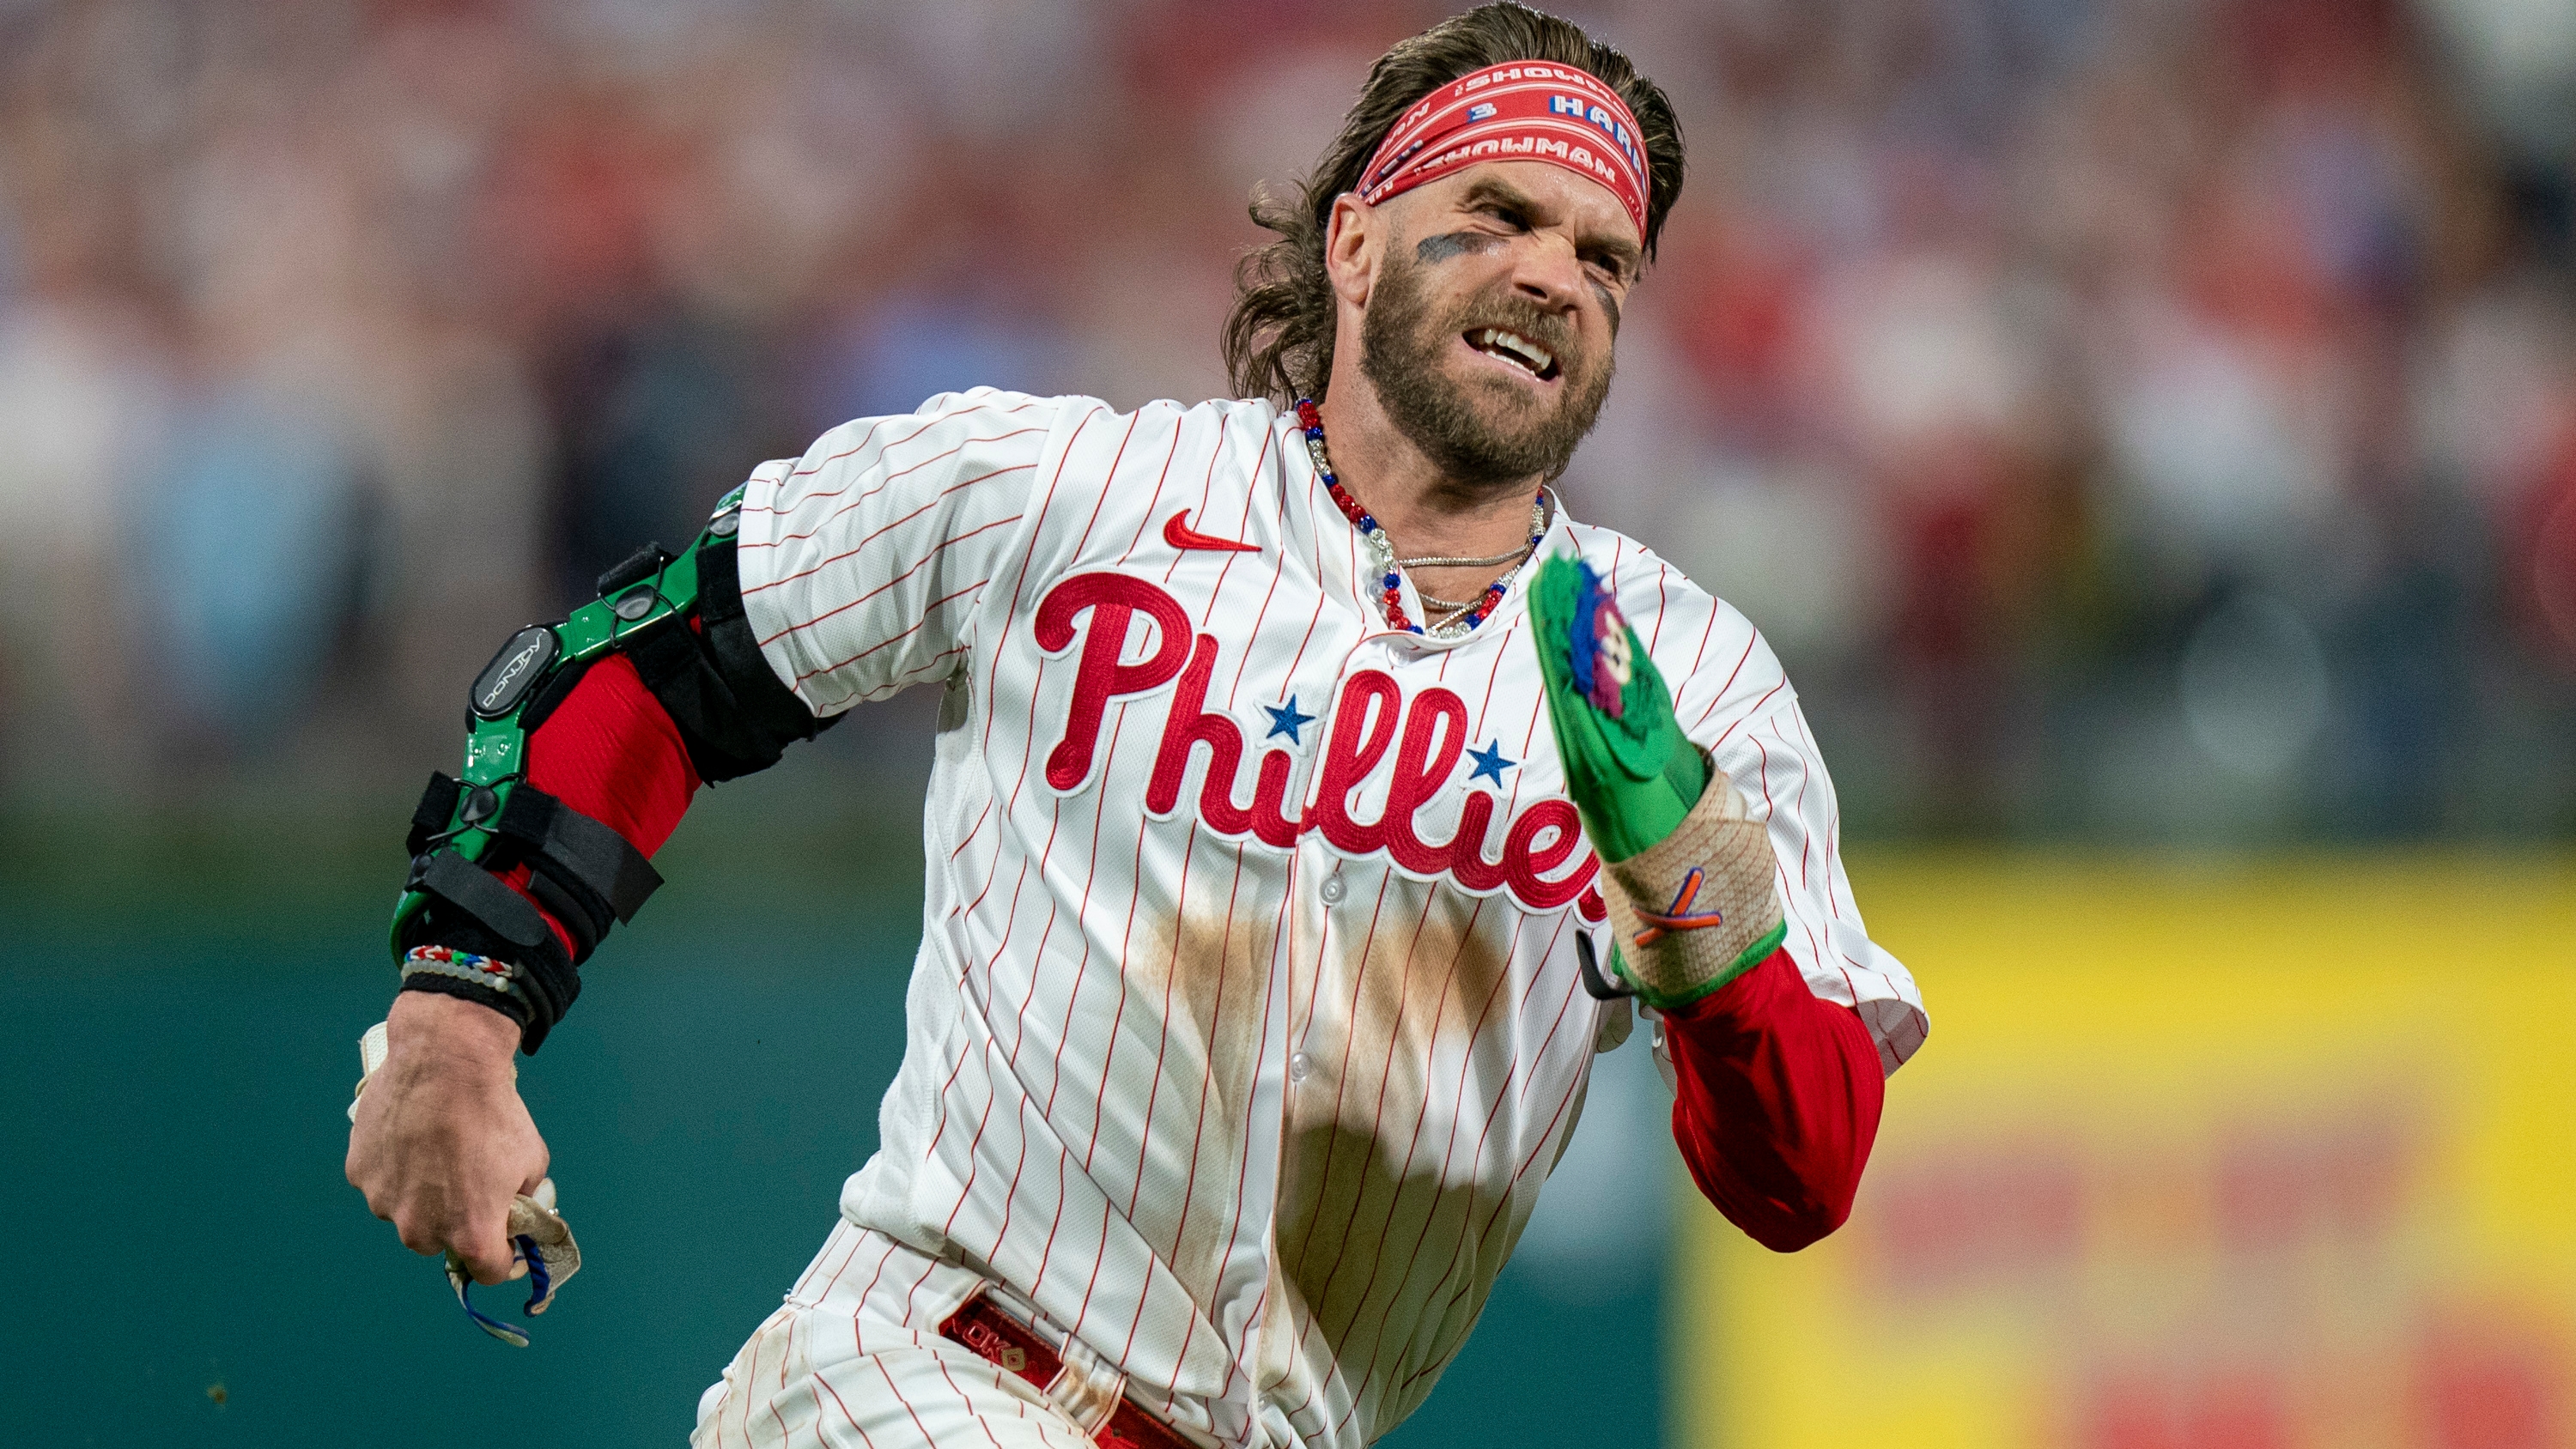 Phillies victory song, explained: How 'Dancing on My Own' became